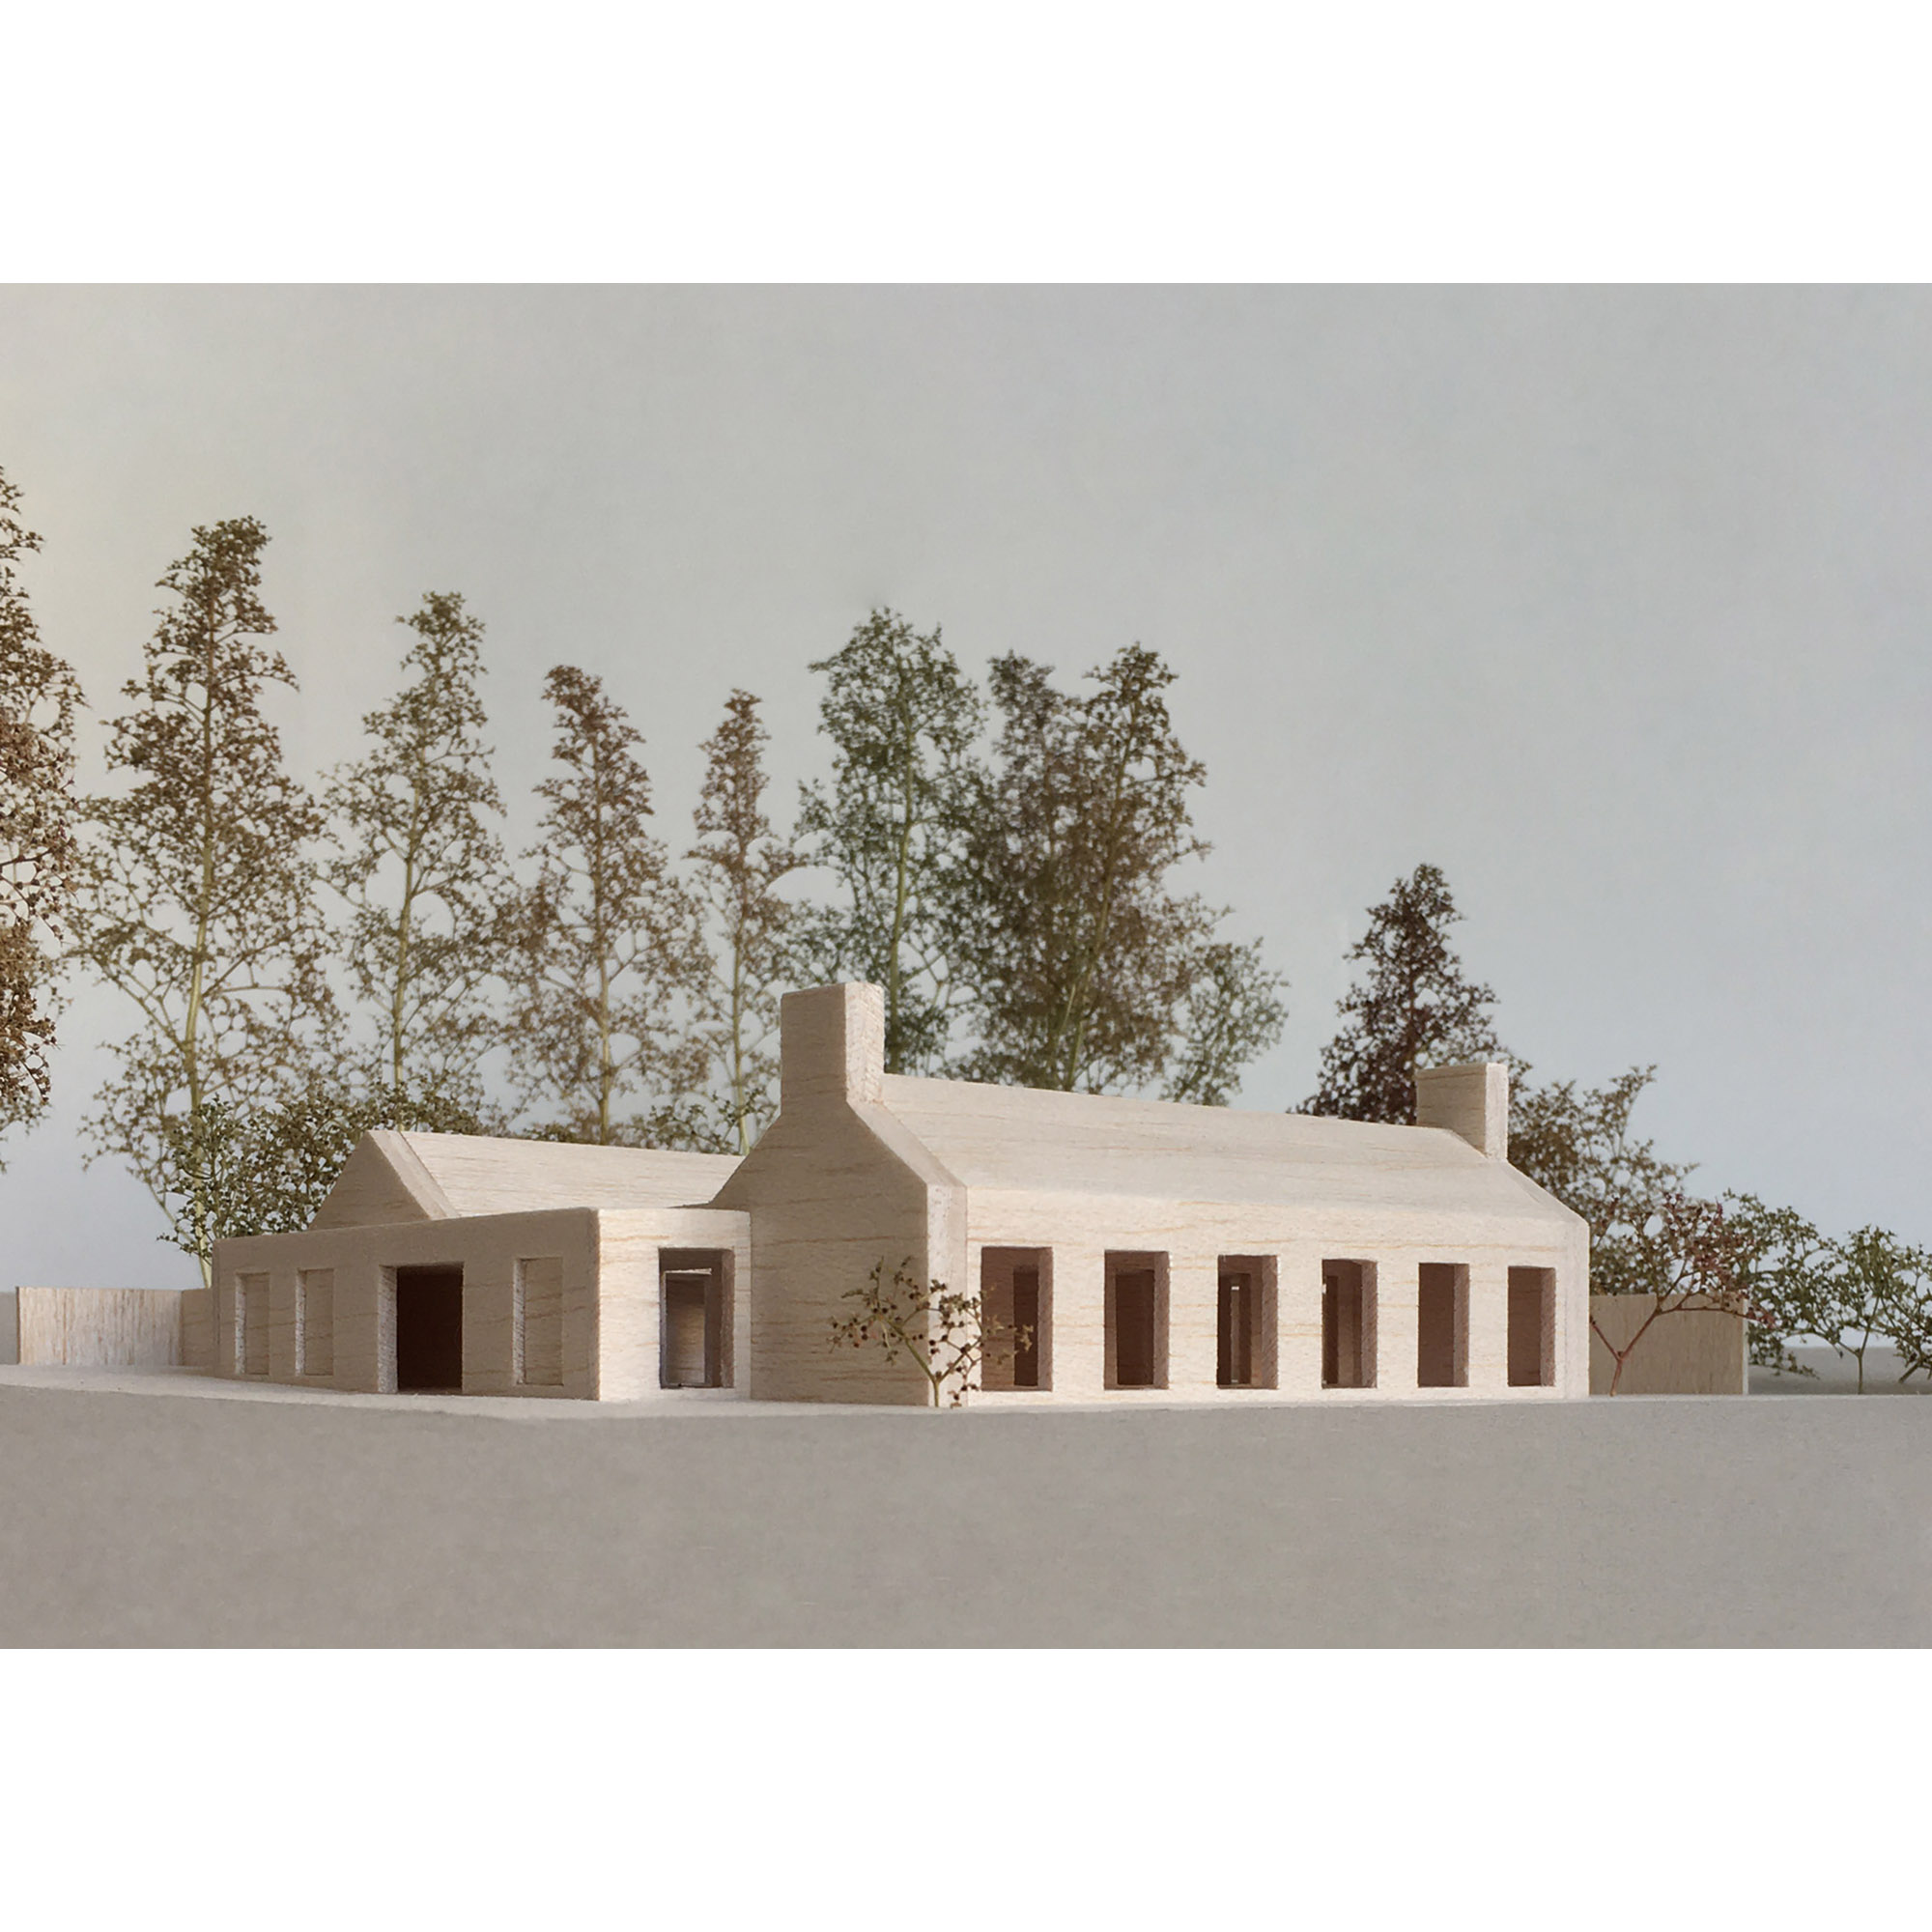 Erbar Mattes Architects Norfolk country house model